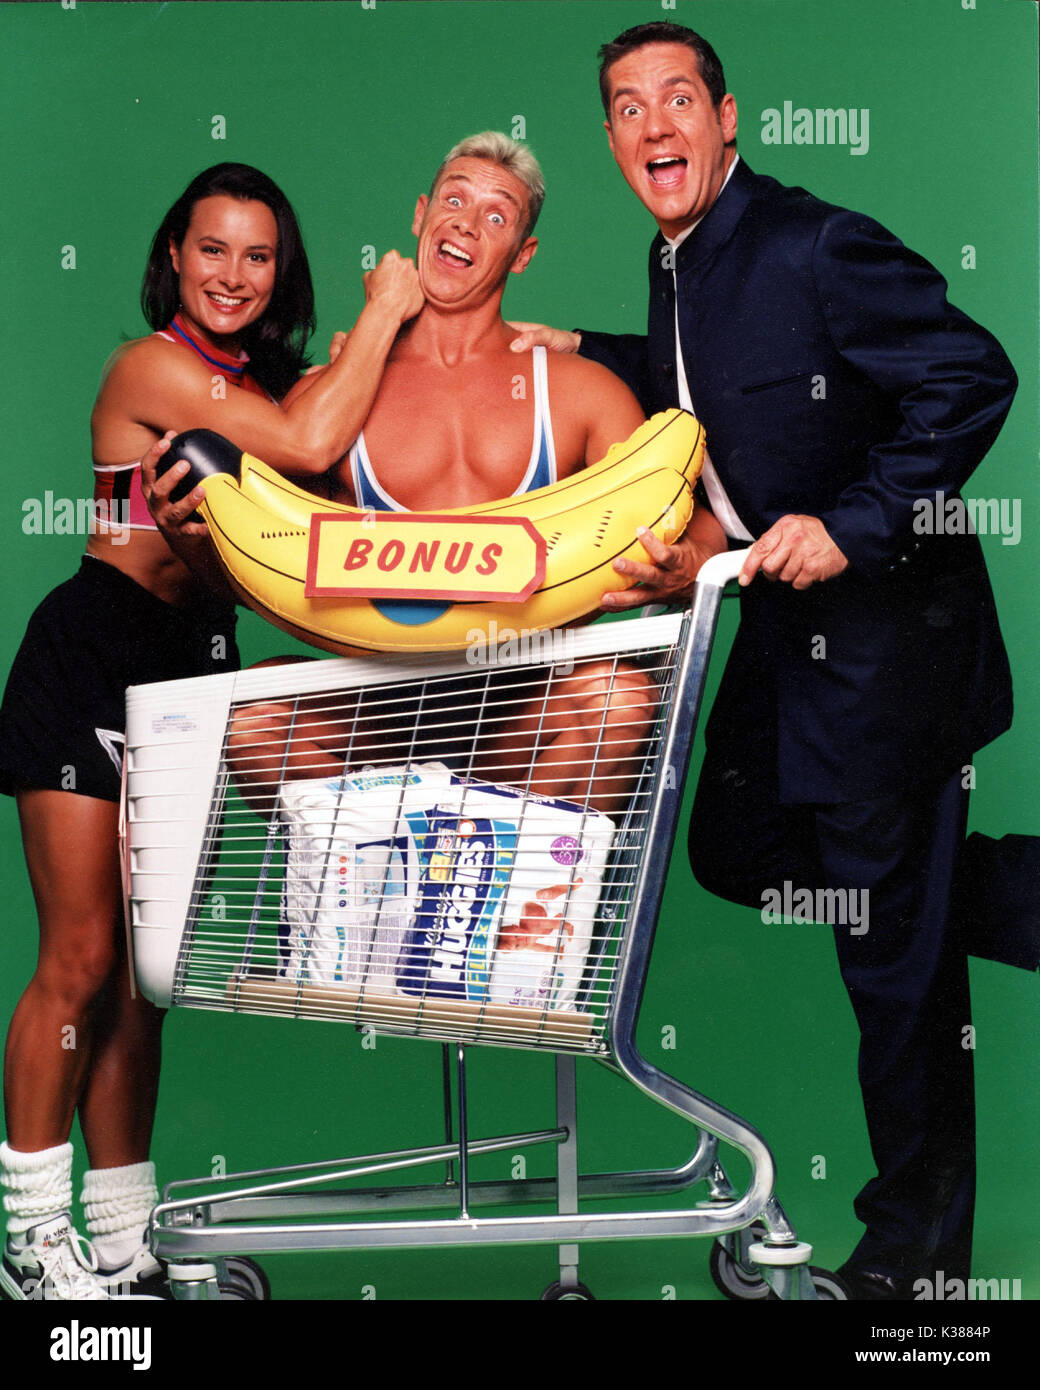 CELEBRITY SUPERMARKET SWEEP Suzanne Cox, Michael Wilson and Dale Winton     Date: 1996 Stock Photo